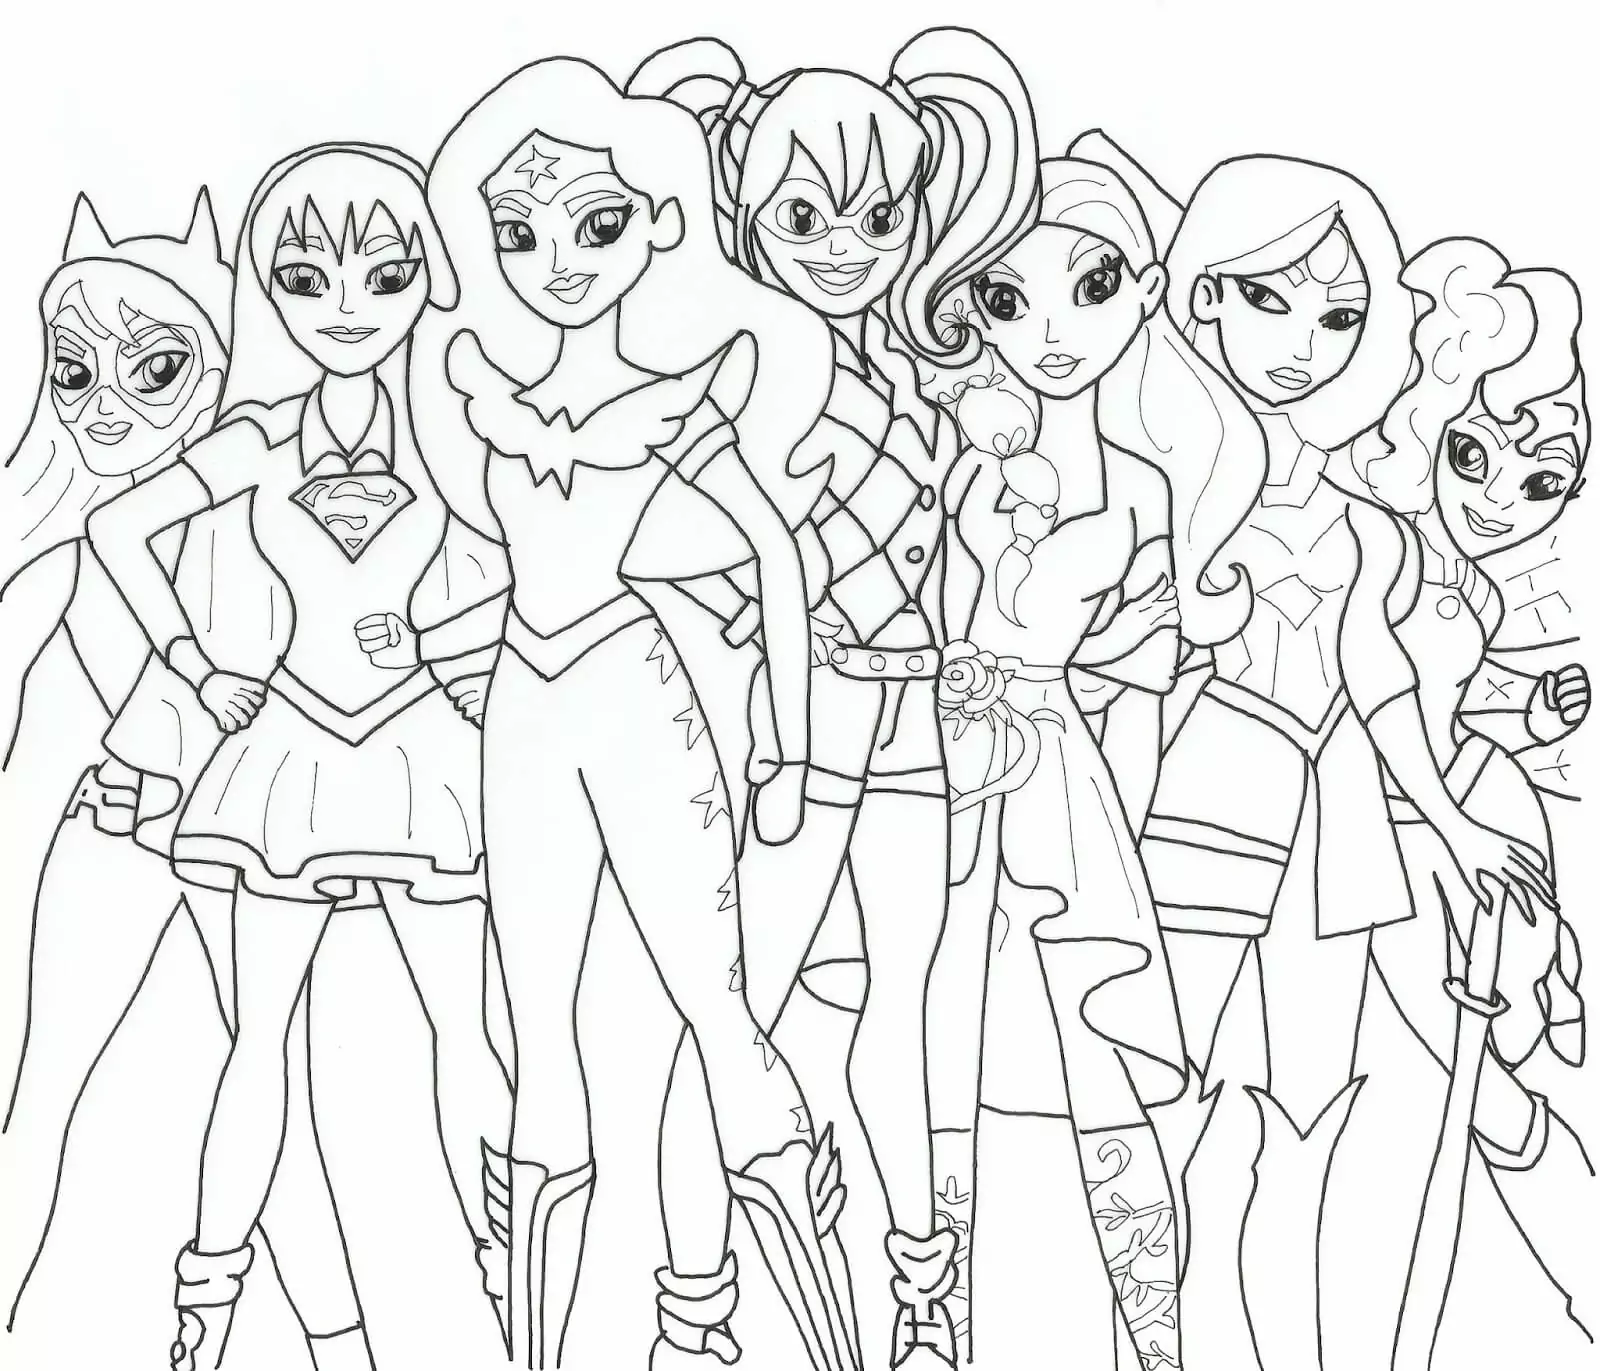 DC Super Hero Girls coloring page